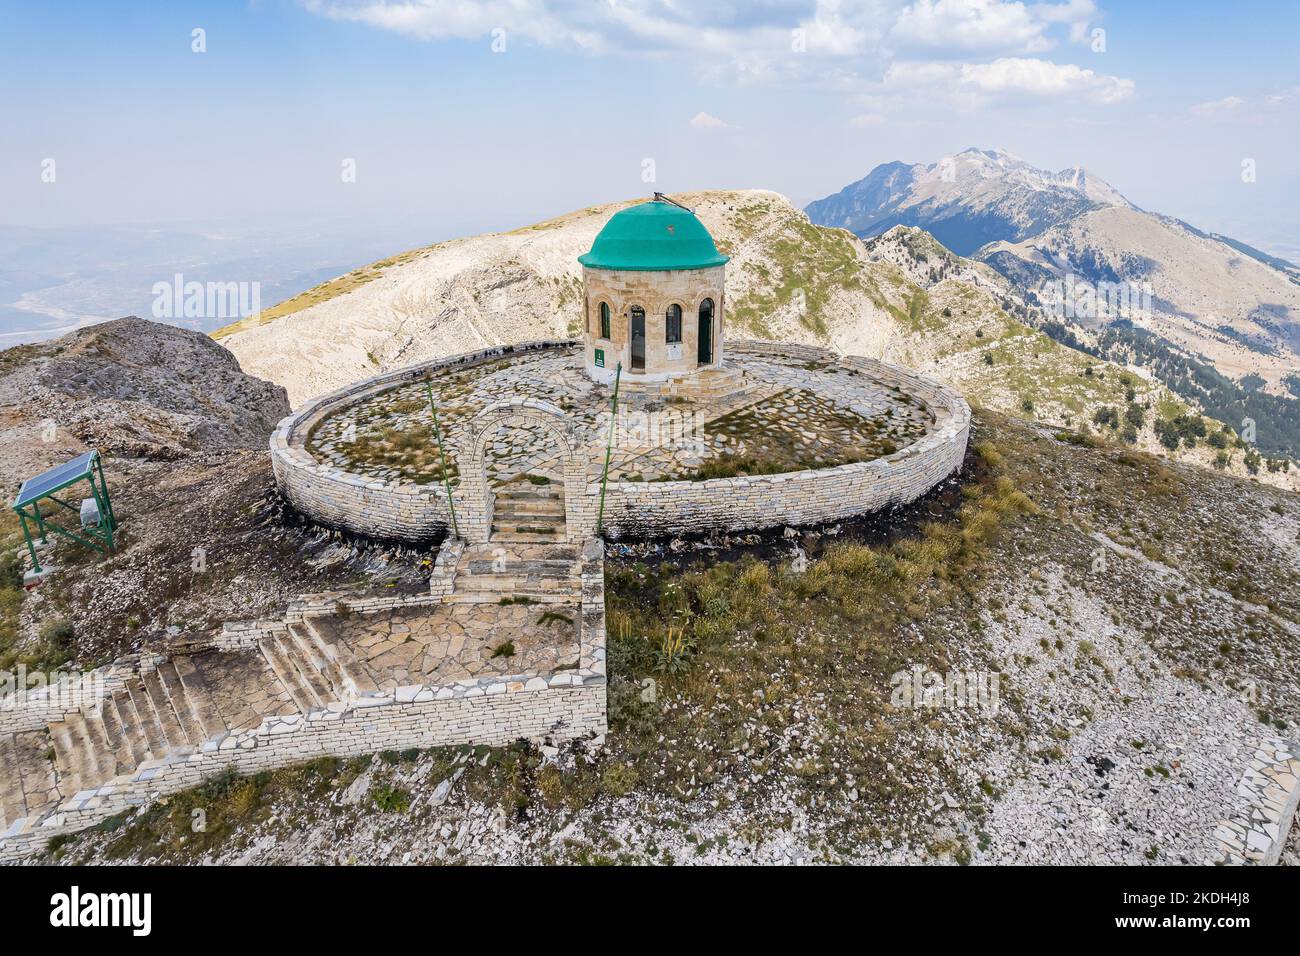 Mount Tomorr is situated within the Tomorr National Park with Shrine (tyrbe) of Abbas ibn Ali on the top in Summer, Albania Stock Photo